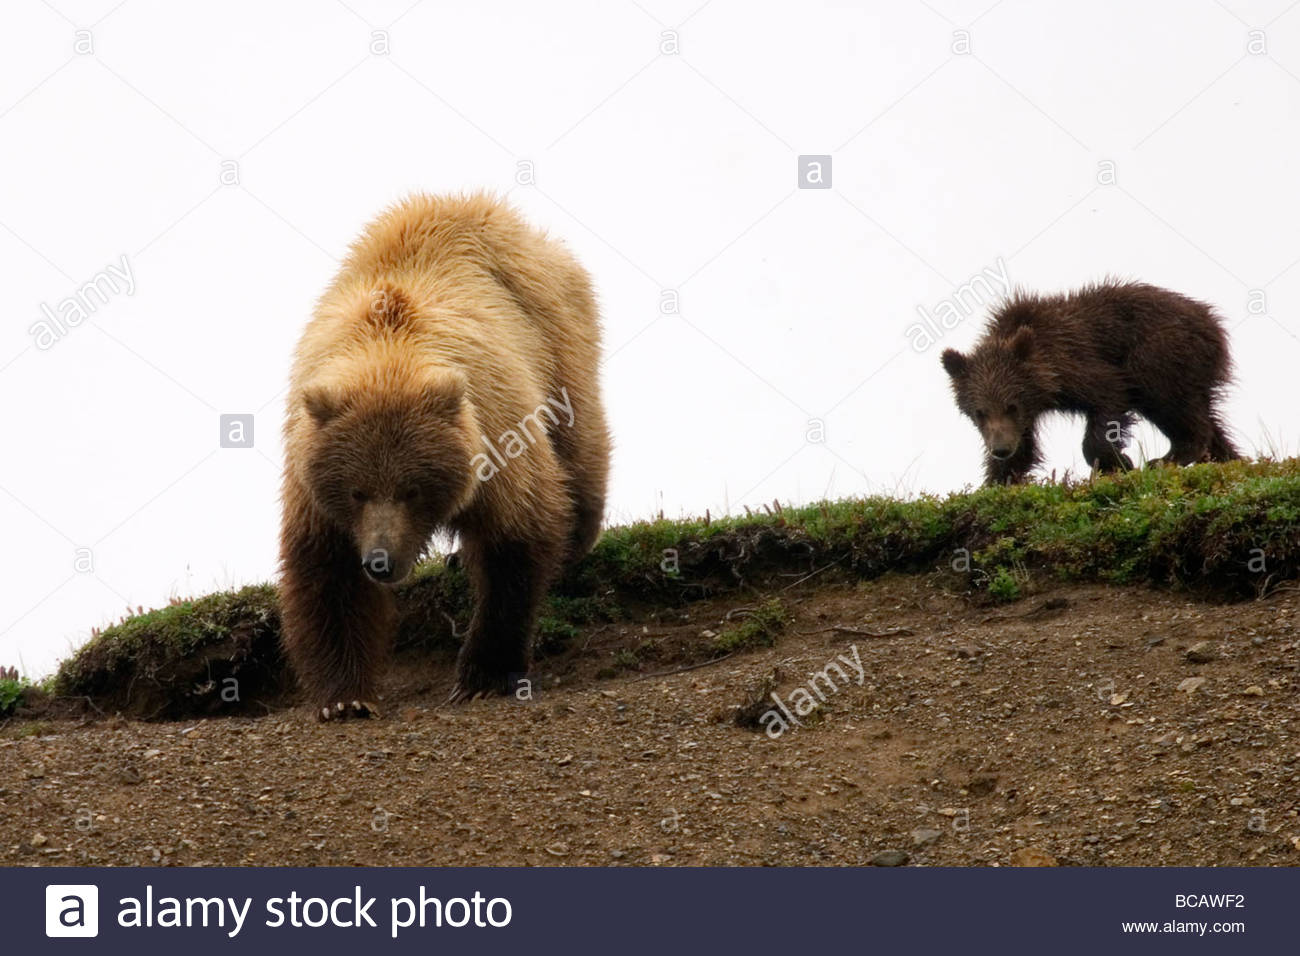 Following mom. Grizzly or Brown Bears (Ursus arctos). Stock Photo